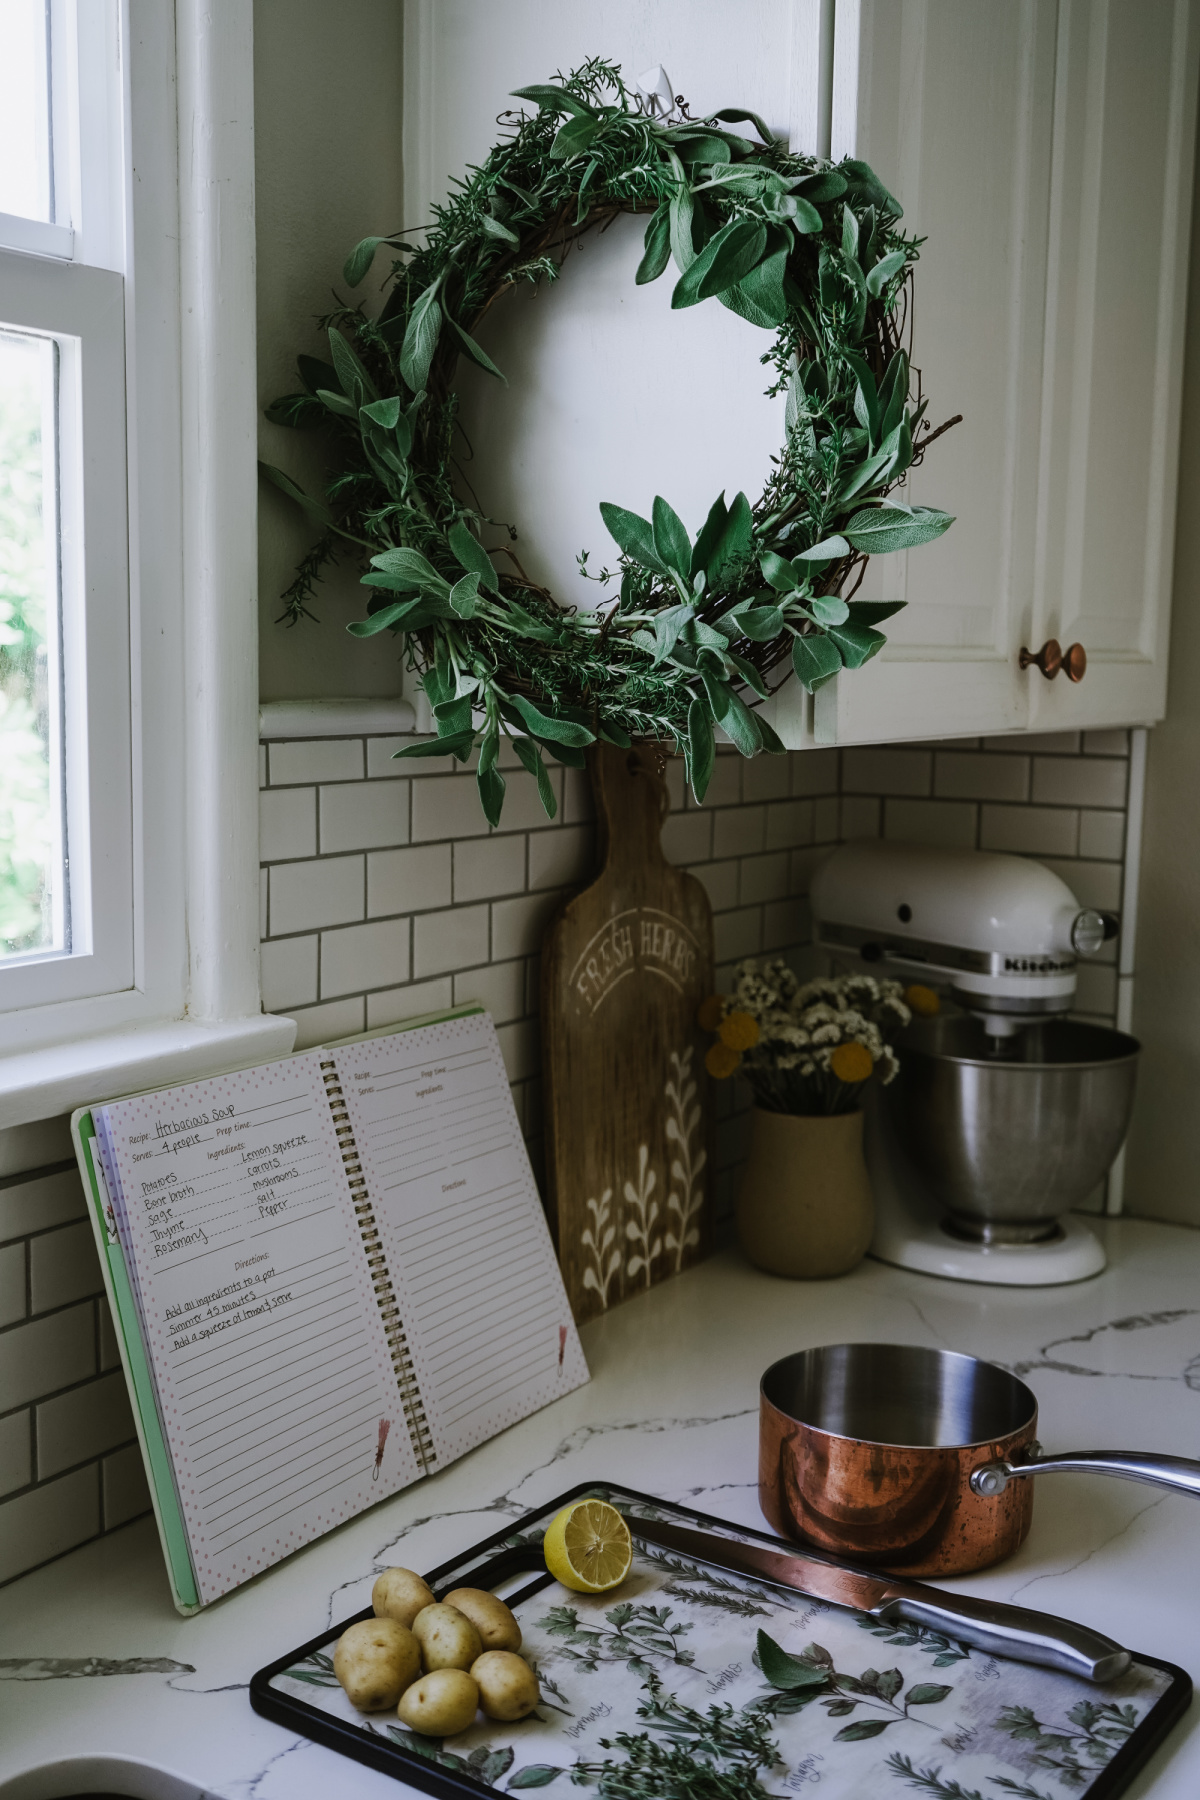 culinary wreath hanging in kitchen